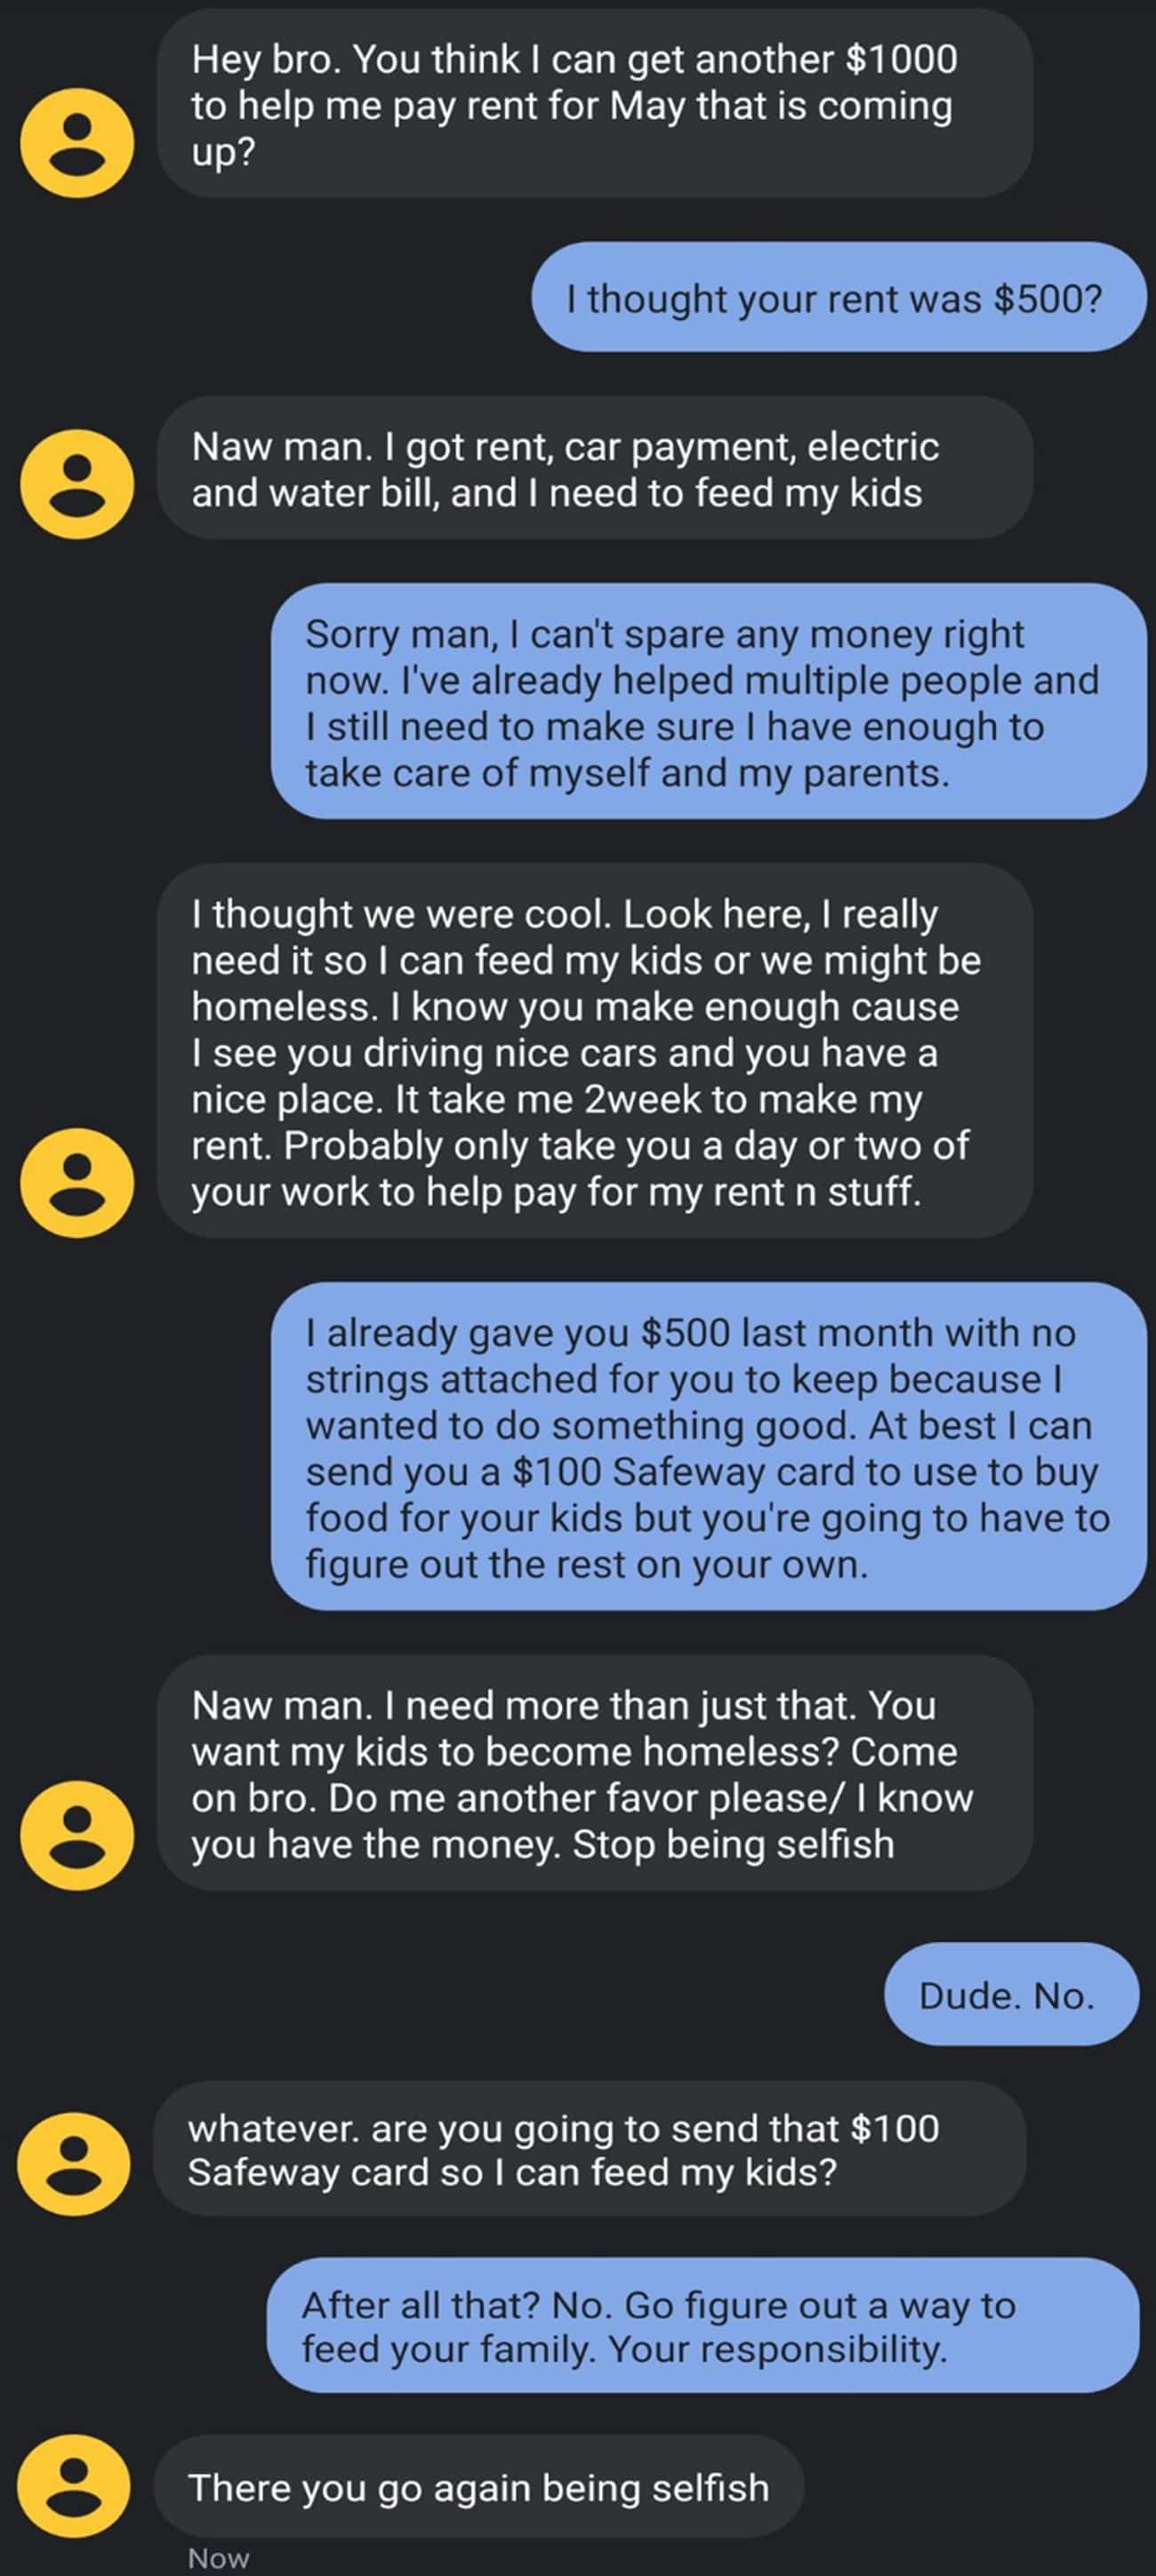 Wanting $1,000 After Someone's Already Given You Money